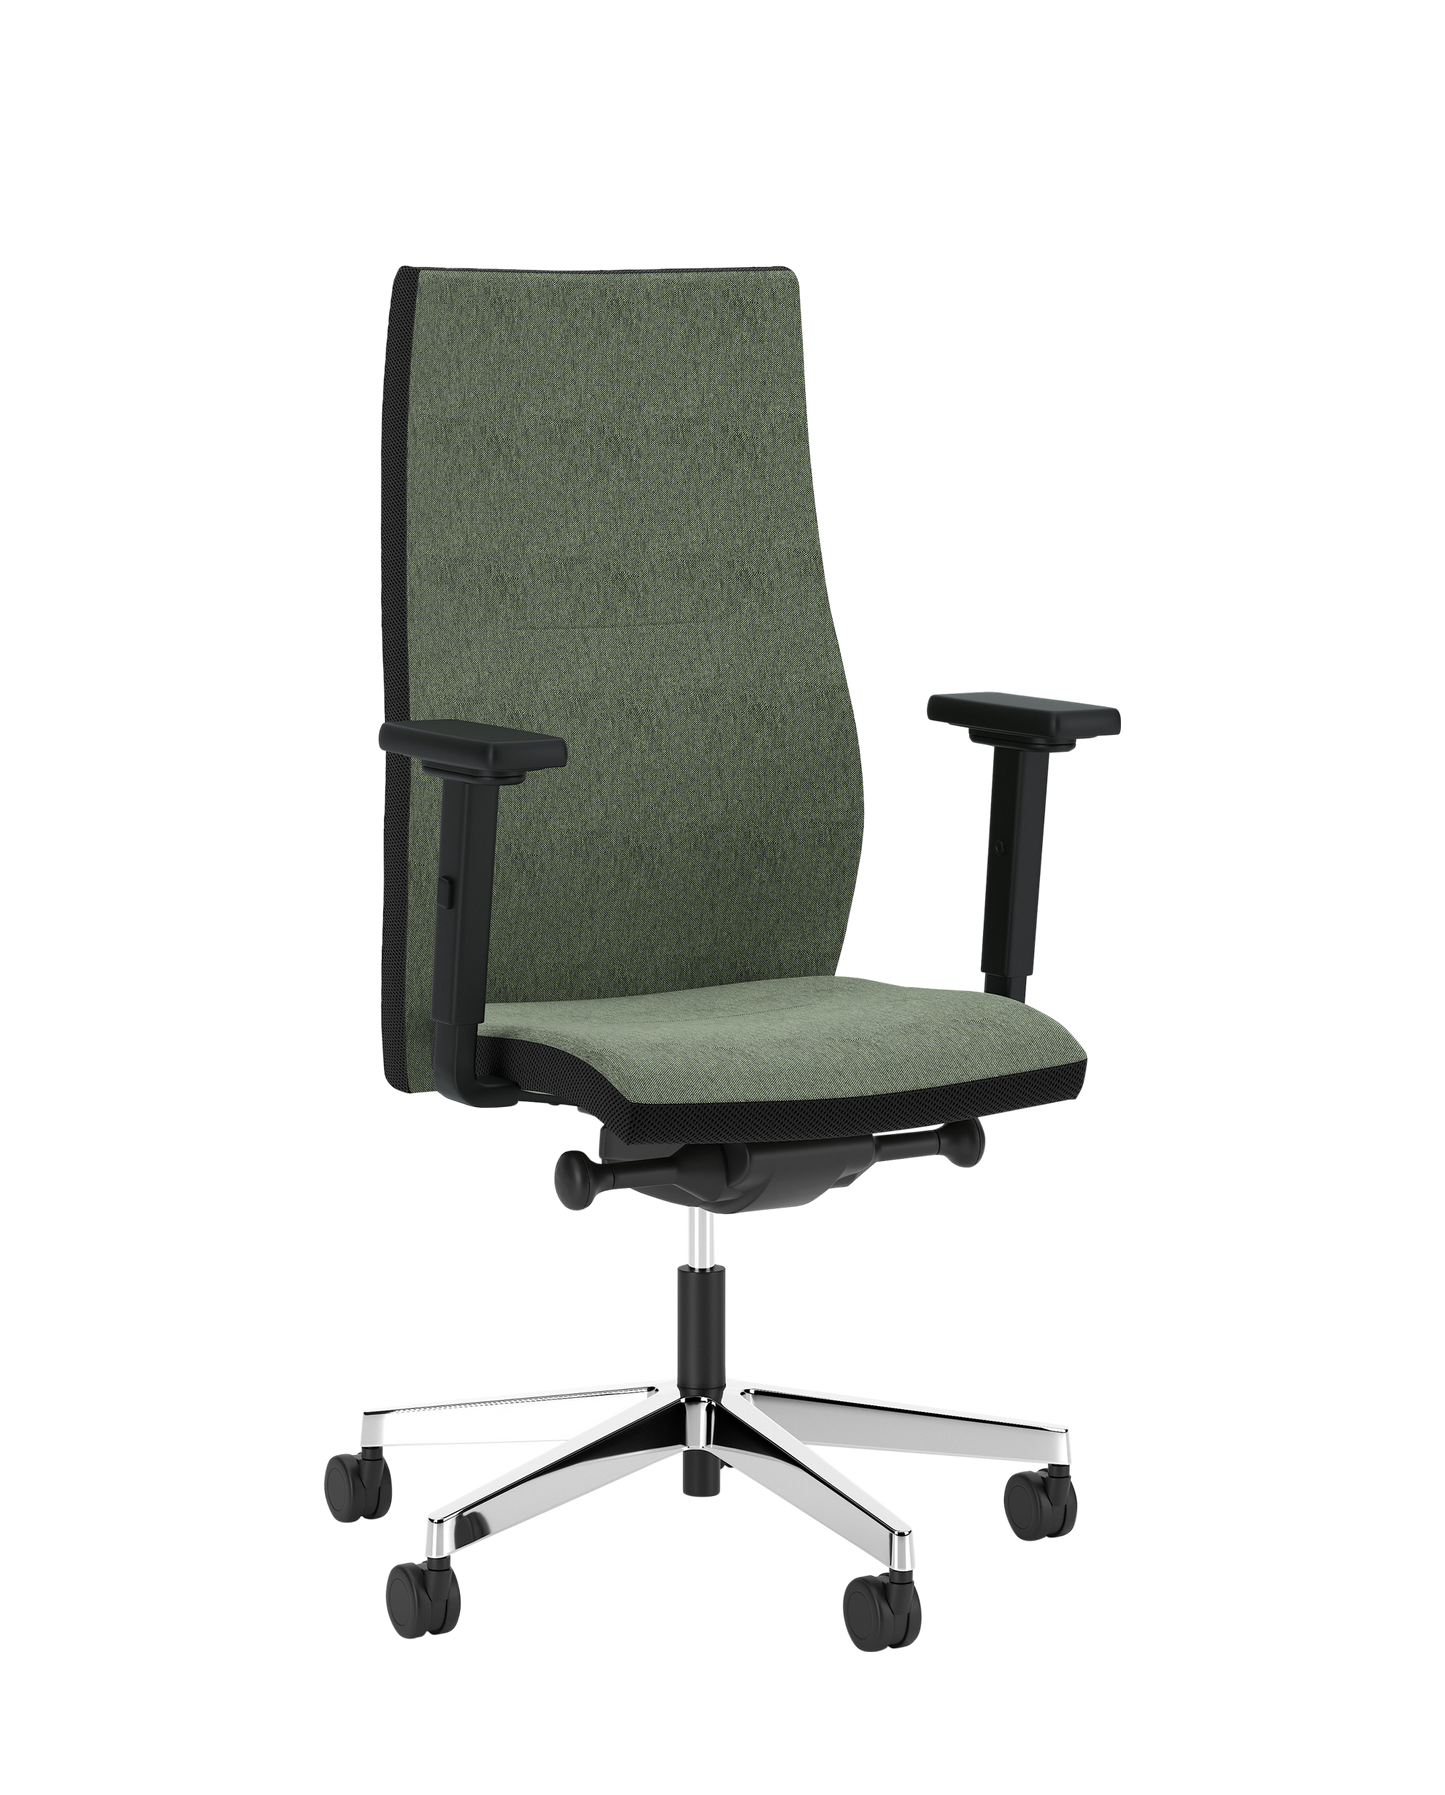 So-One Office Chair